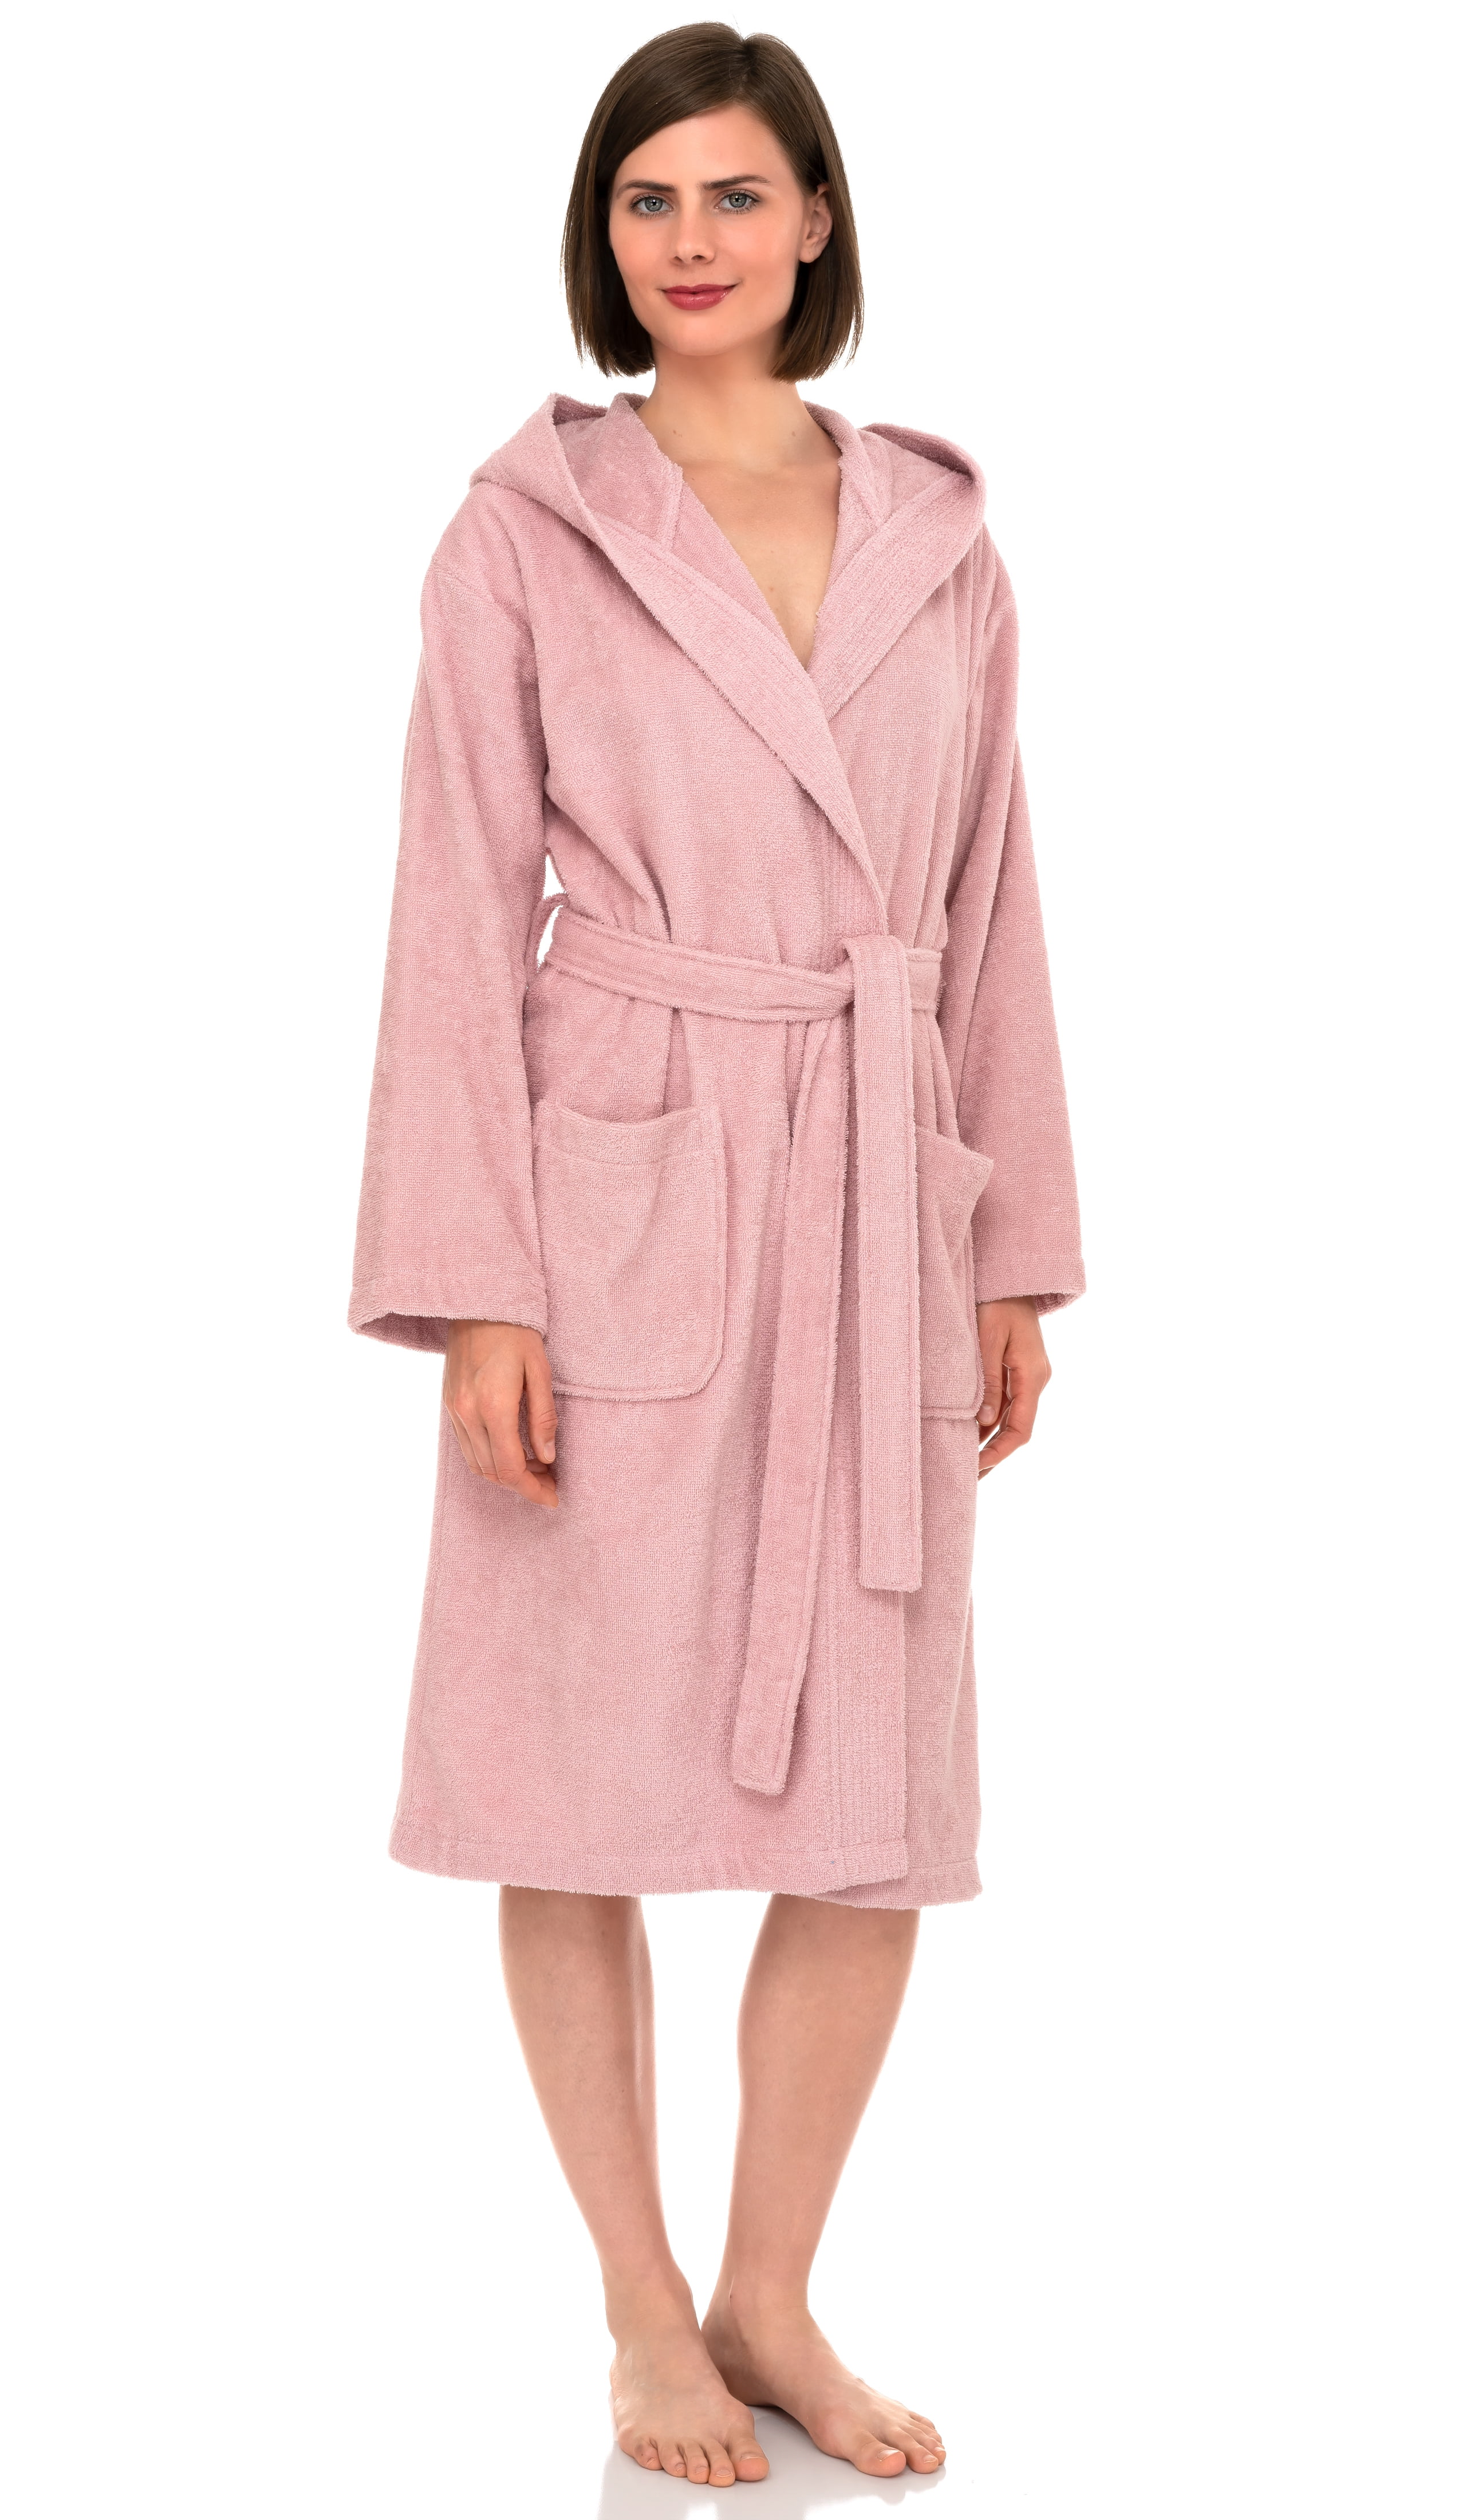 Made in Turkey Cotton Terry Cloth Bathrobe TowelSelections Womens Hooded Robe